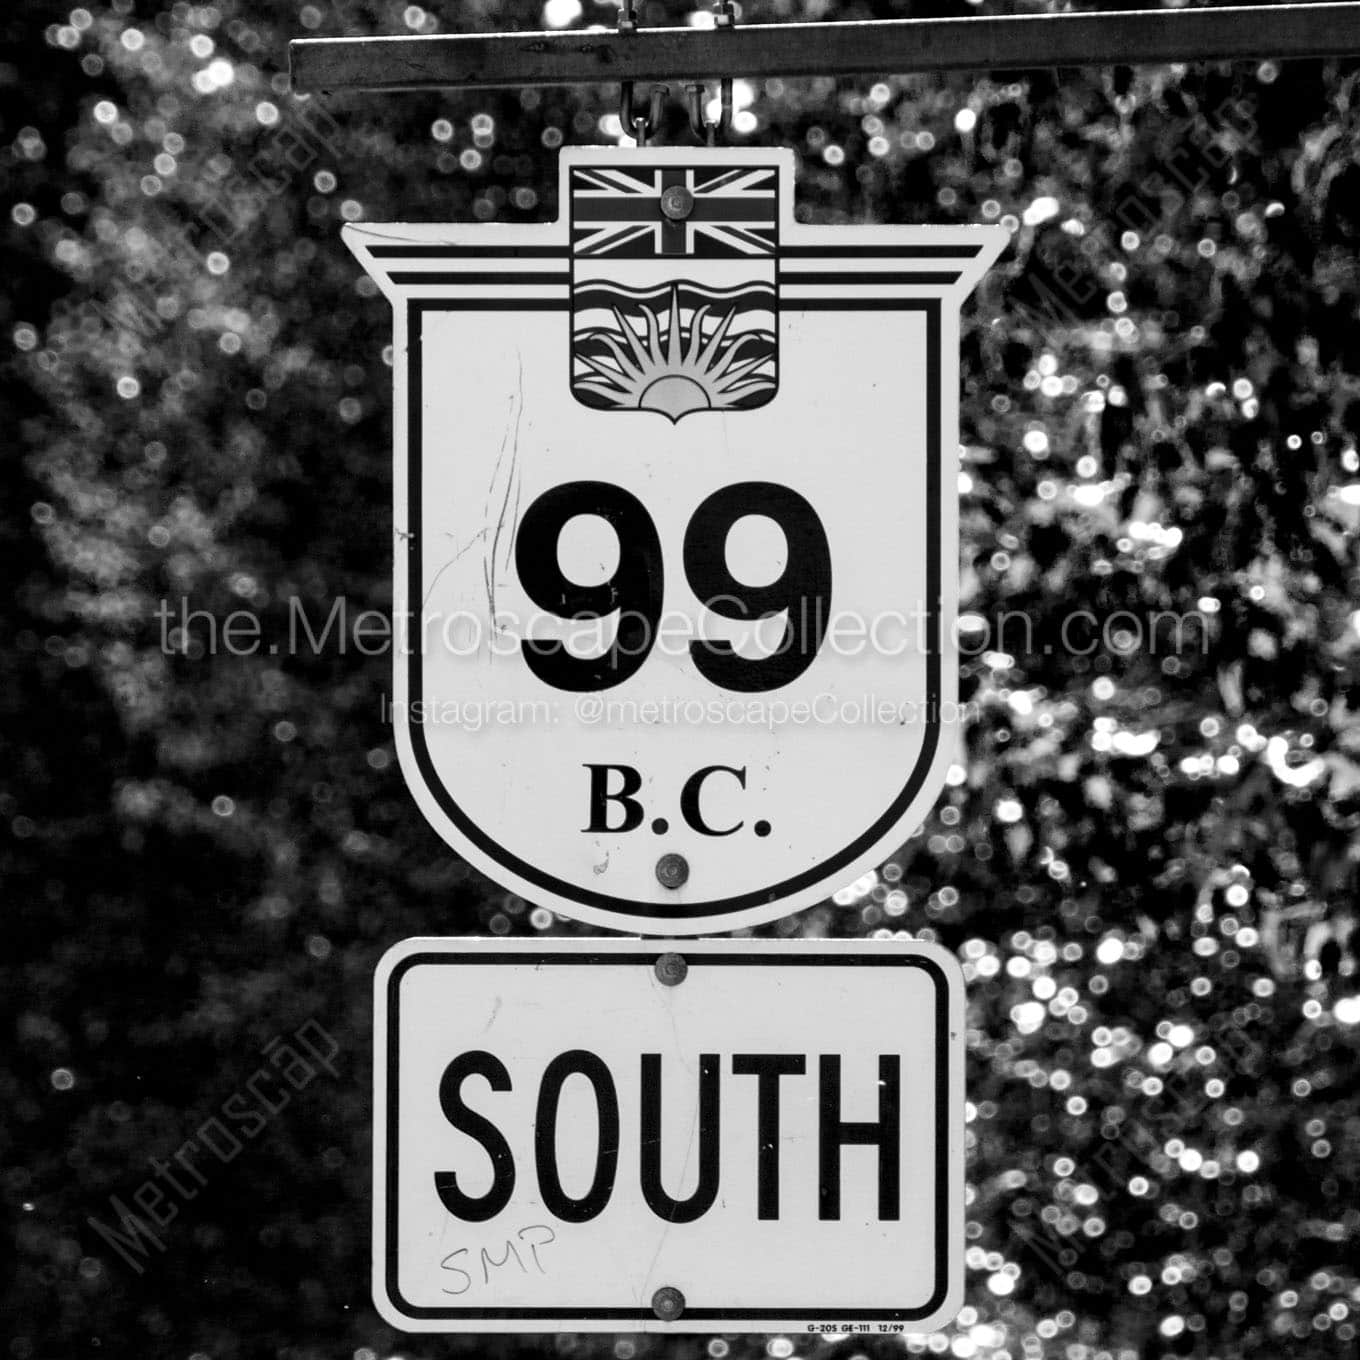 bc route 99 south sign Black & White Wall Art